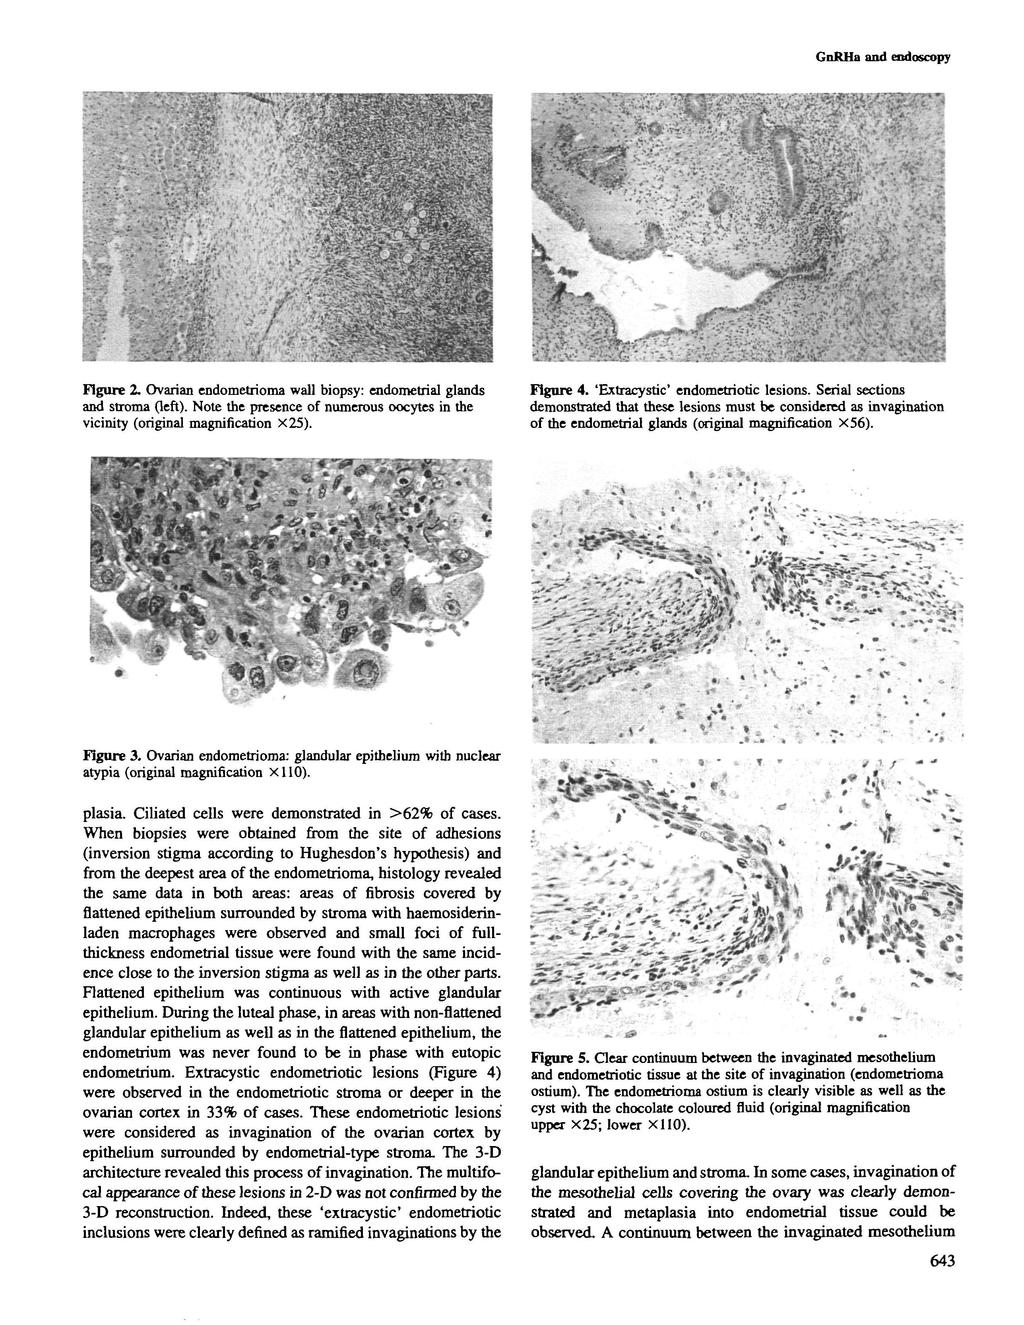 GnRHa and eodoscopy Figure 2. Ovarian endometrioma wall biopsy: endometrial glands and stroma (left)- Note the presence of numerous oocytes in the vicinity (original magnification X25). Figure 4.